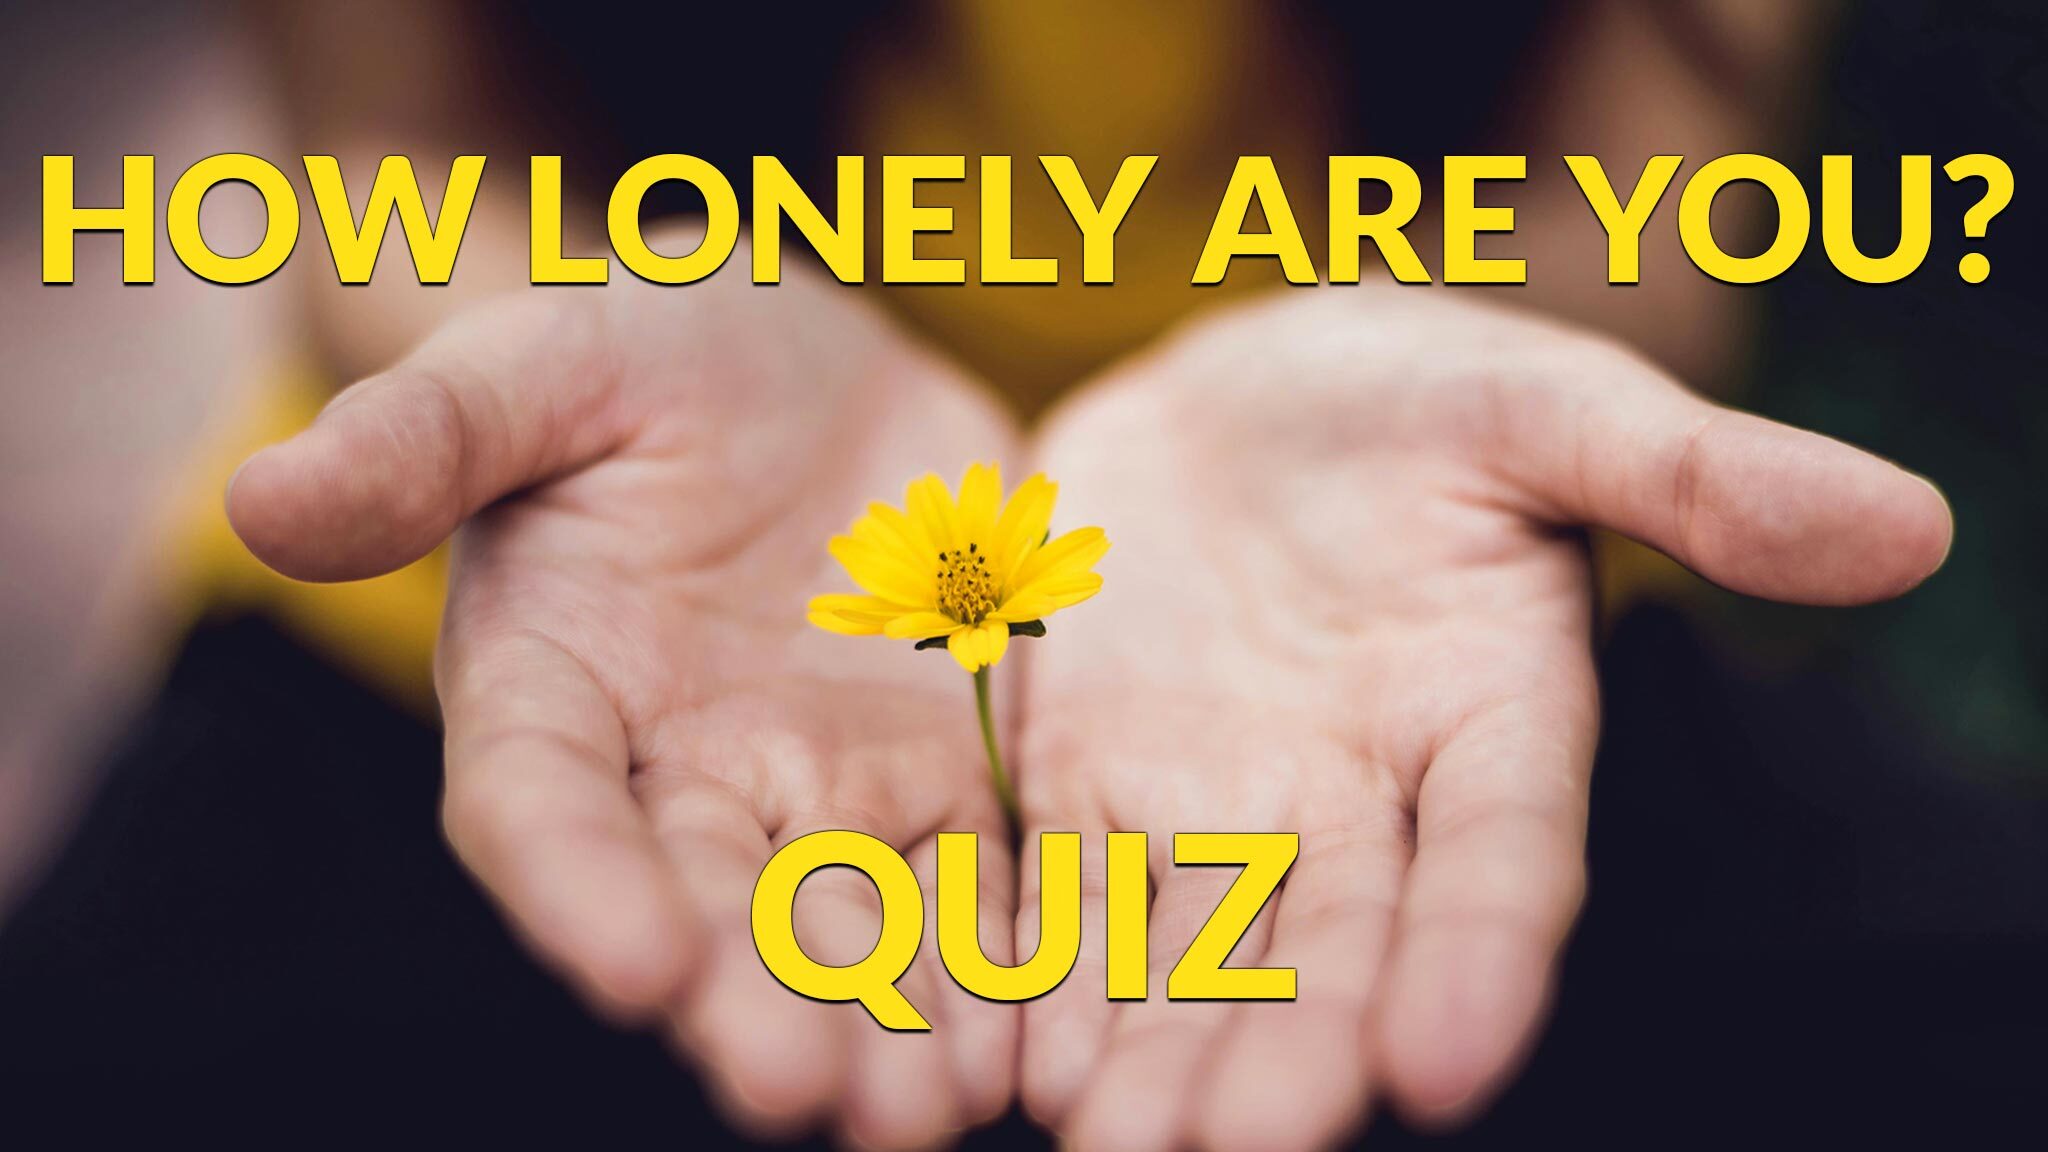 open hands facing palms upward with a small yellow flower rising between them, text overlay that reads: how lonely are quiz